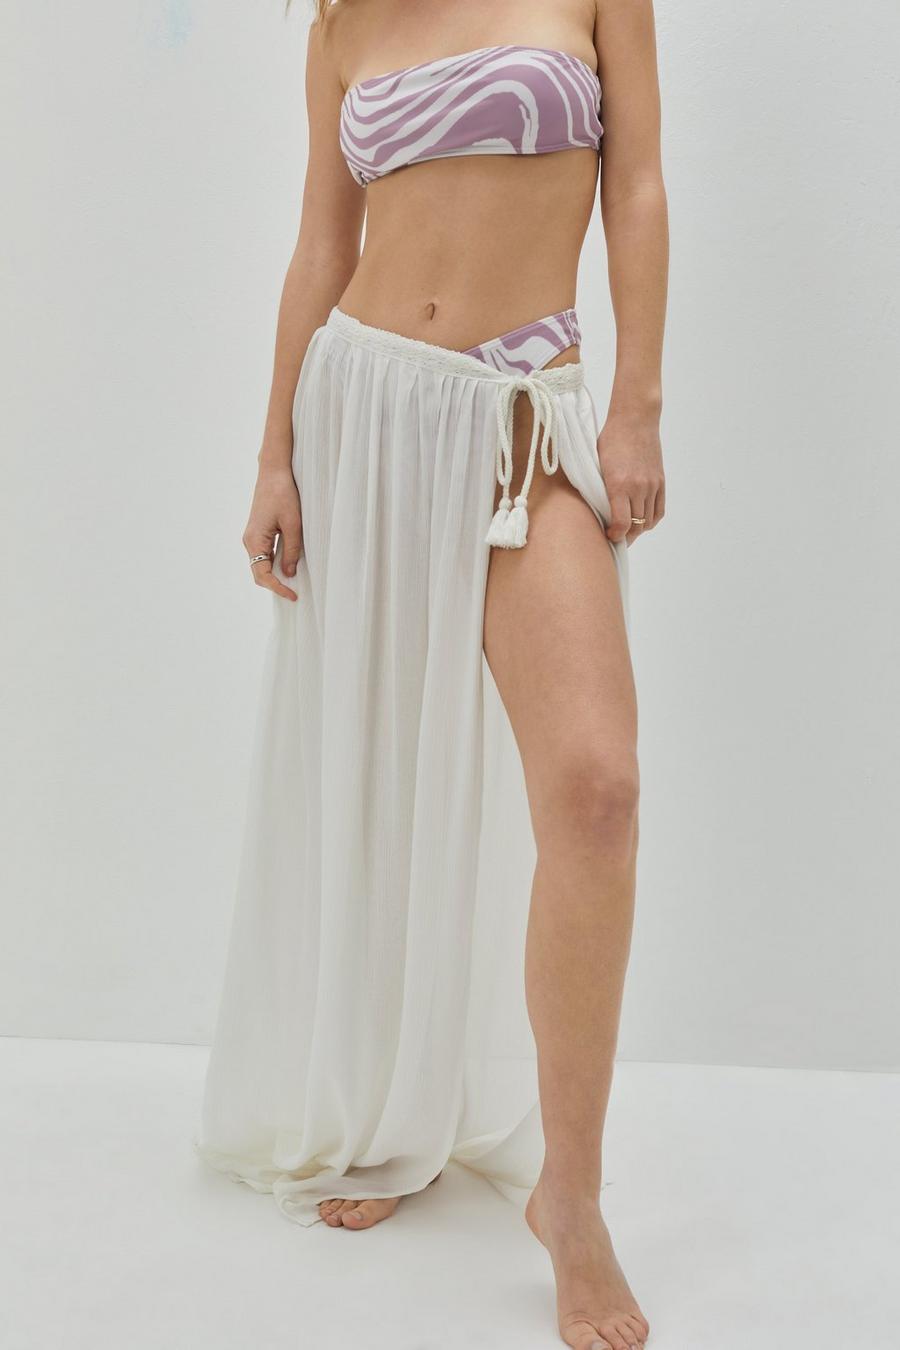 Crinkle Viscose Beach Cover Up Maxi Skirt